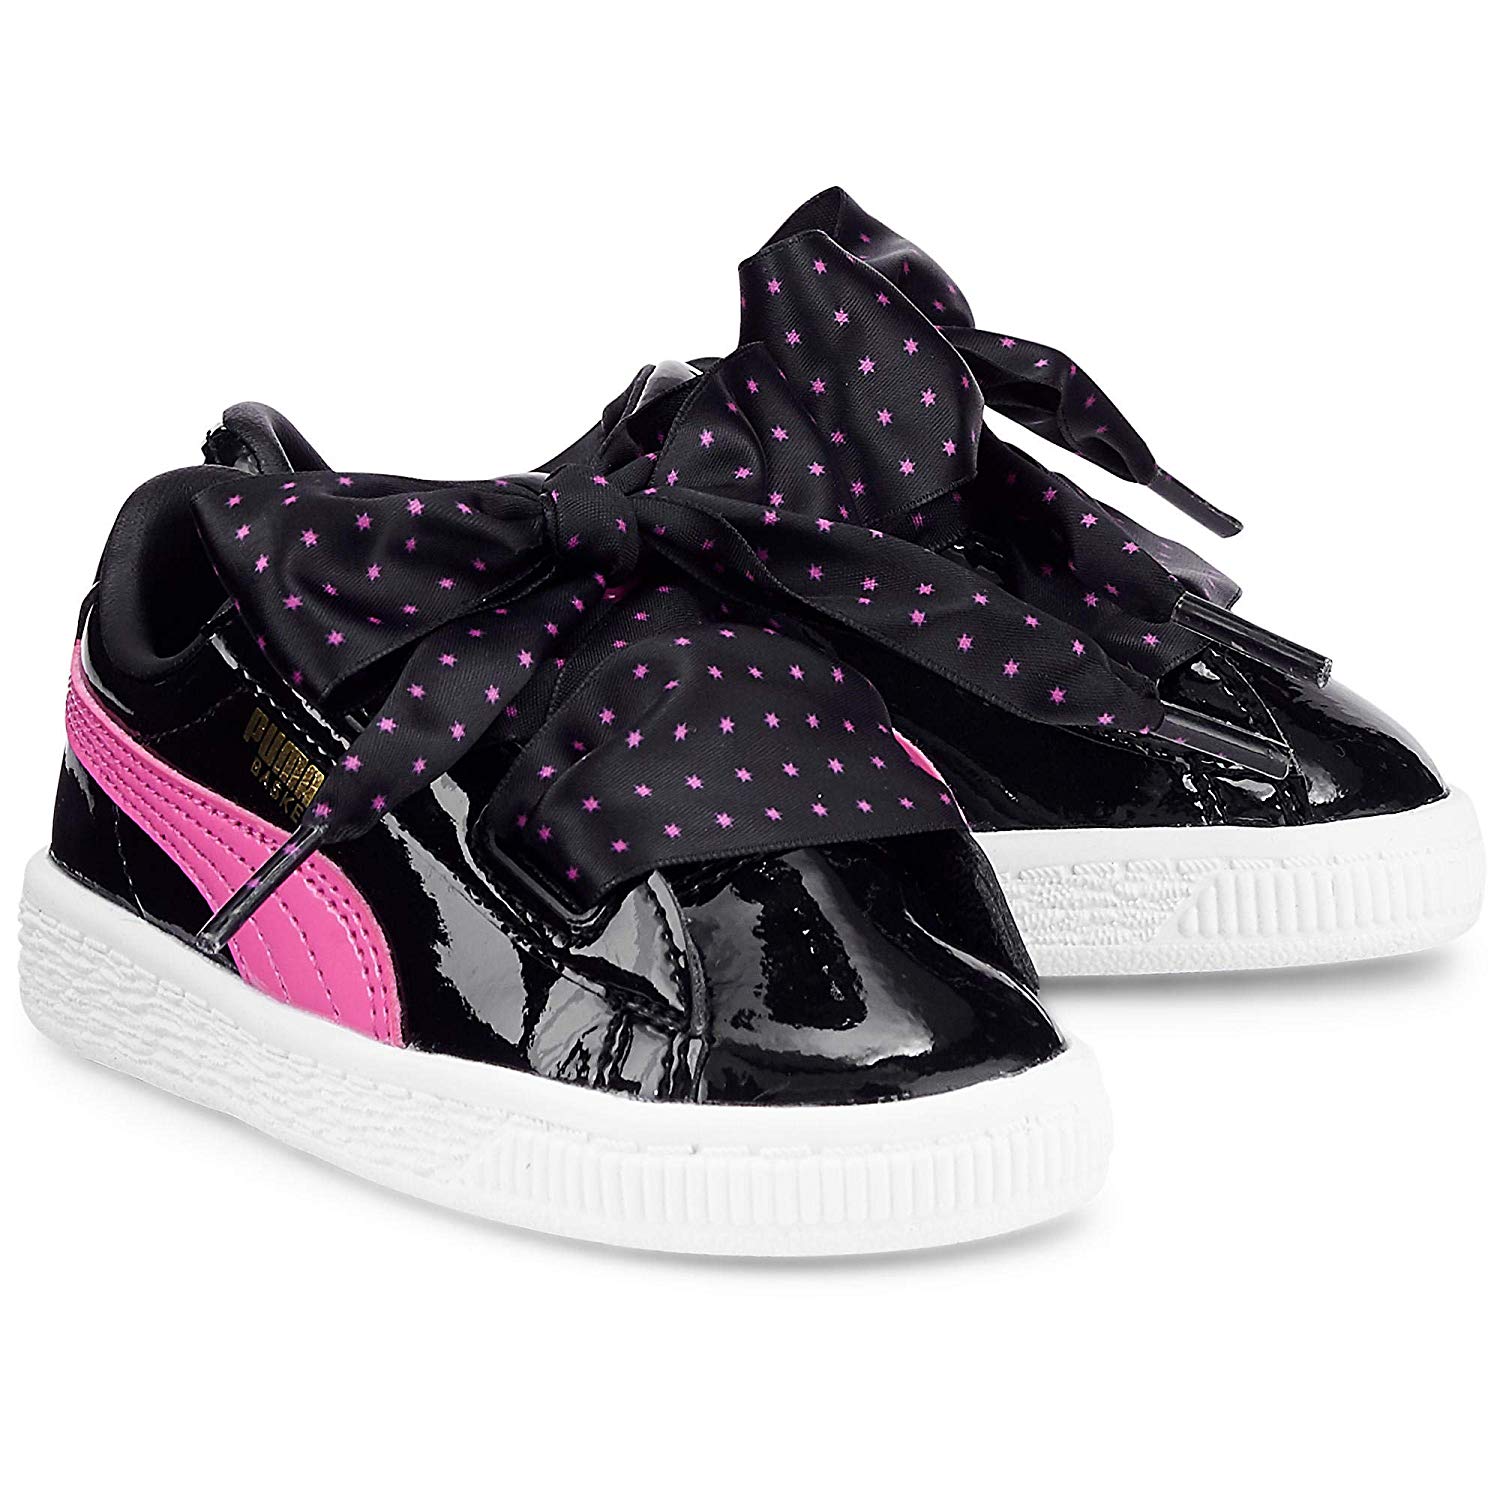 PUMA BASKET HEART STARS INF - 367822 02 – Shoes Brothers